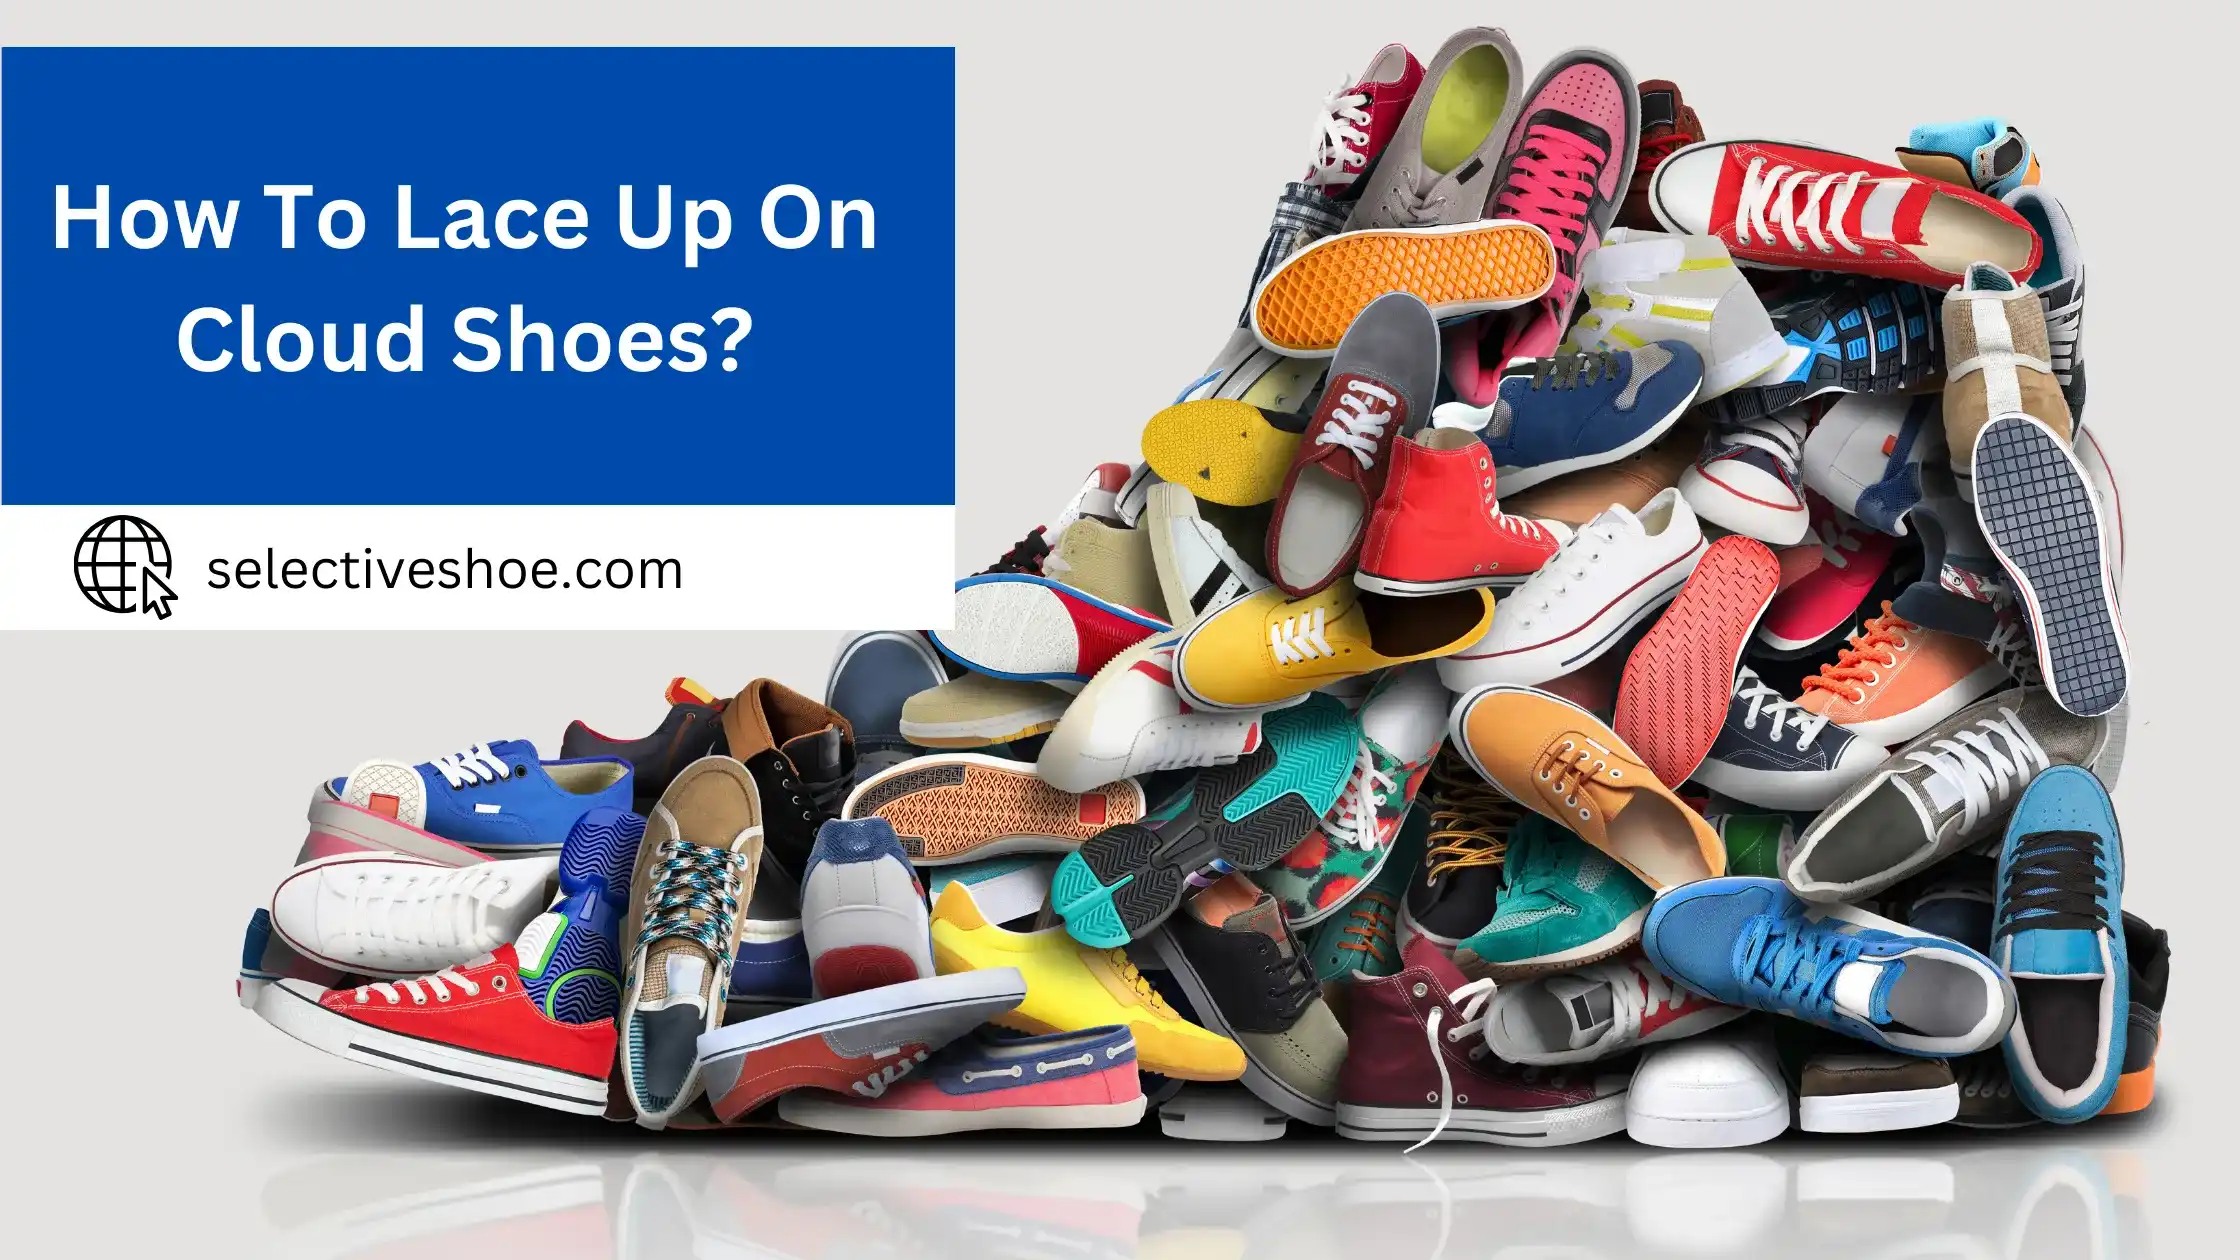 How To Lace Up On Cloud Shoes? Expert Tips And Advice